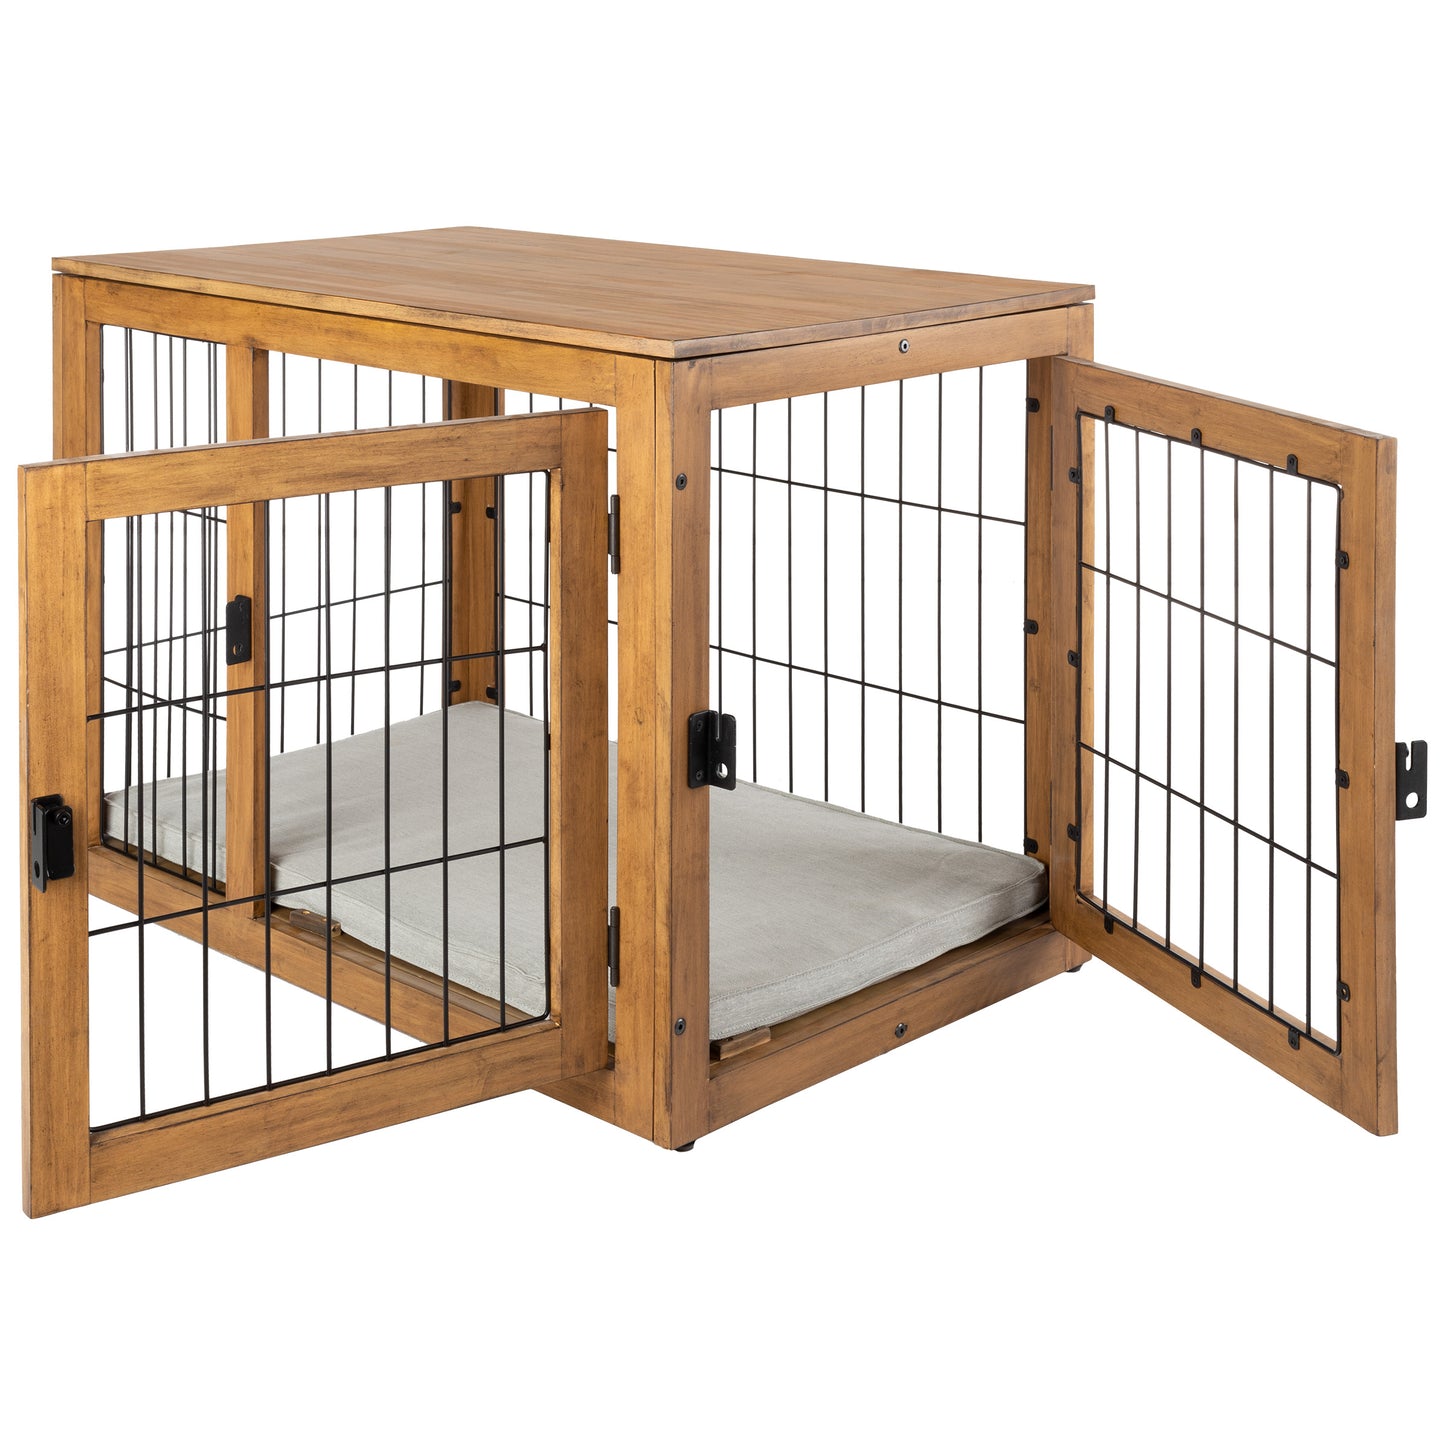 Furniture-Style Dog Crate, Natural